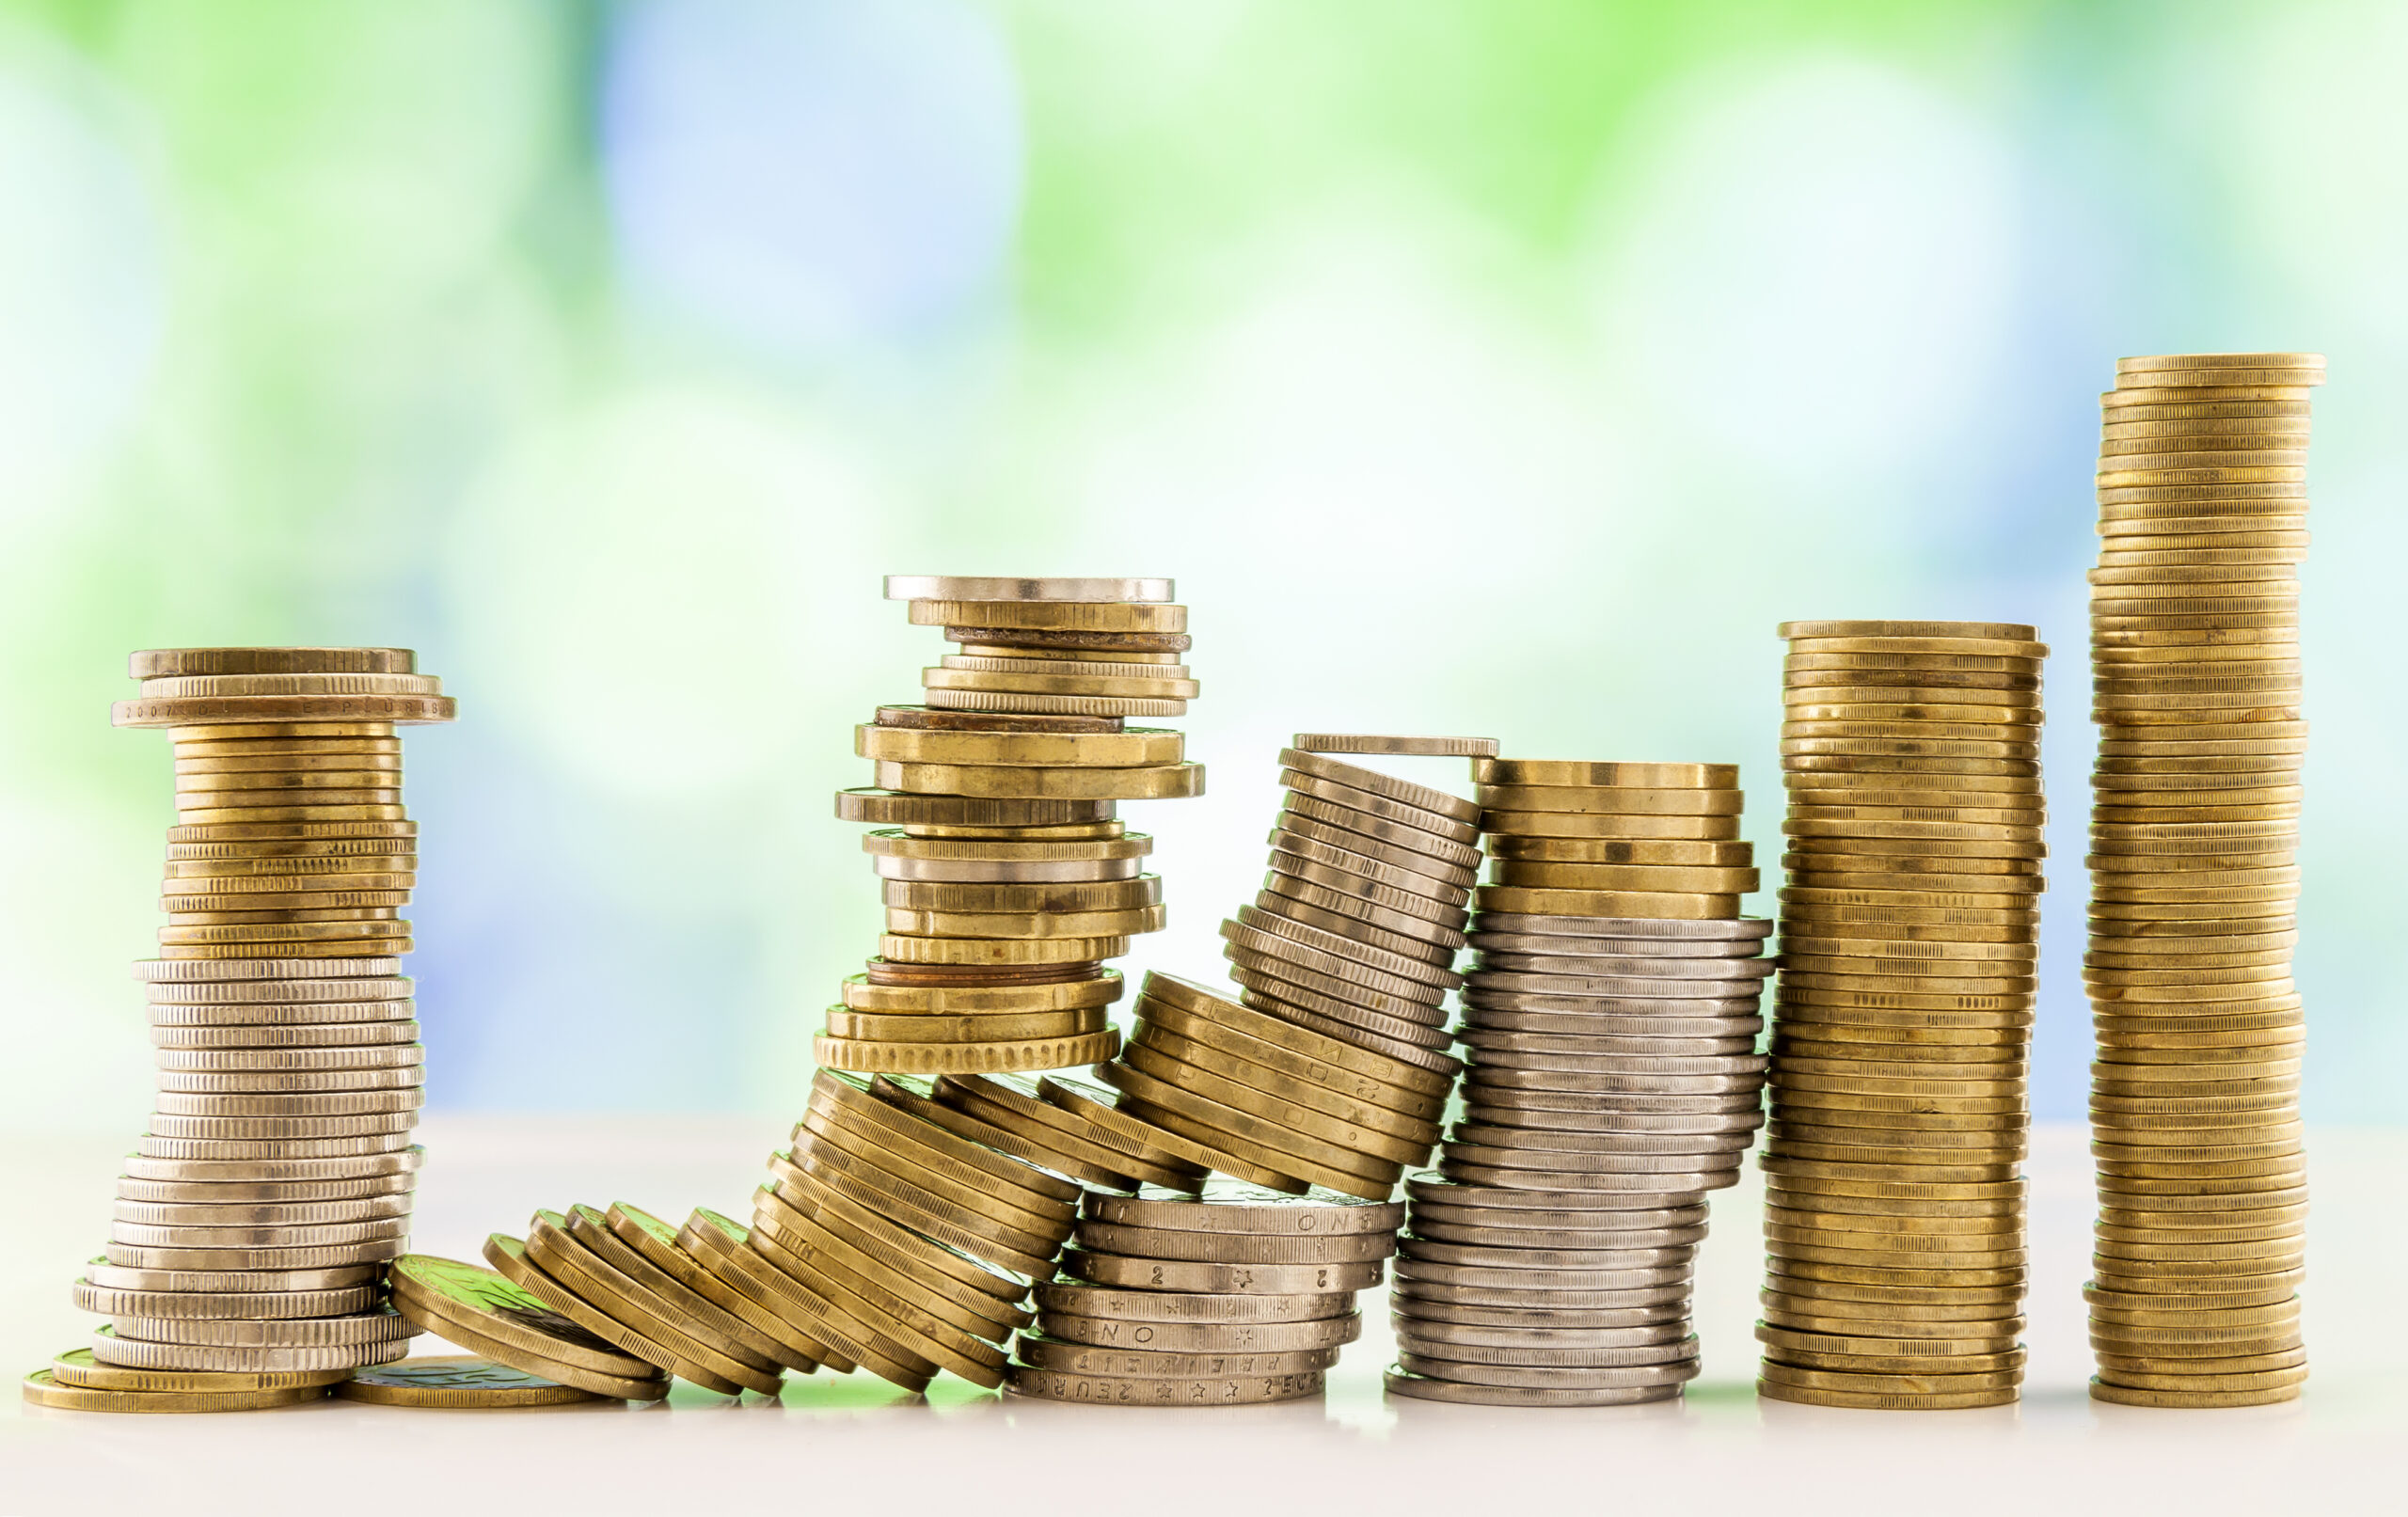 Growing coins stacks with green and blue sparkling bokeh background. Financial growth, saving money, business finance wealth and success concept.